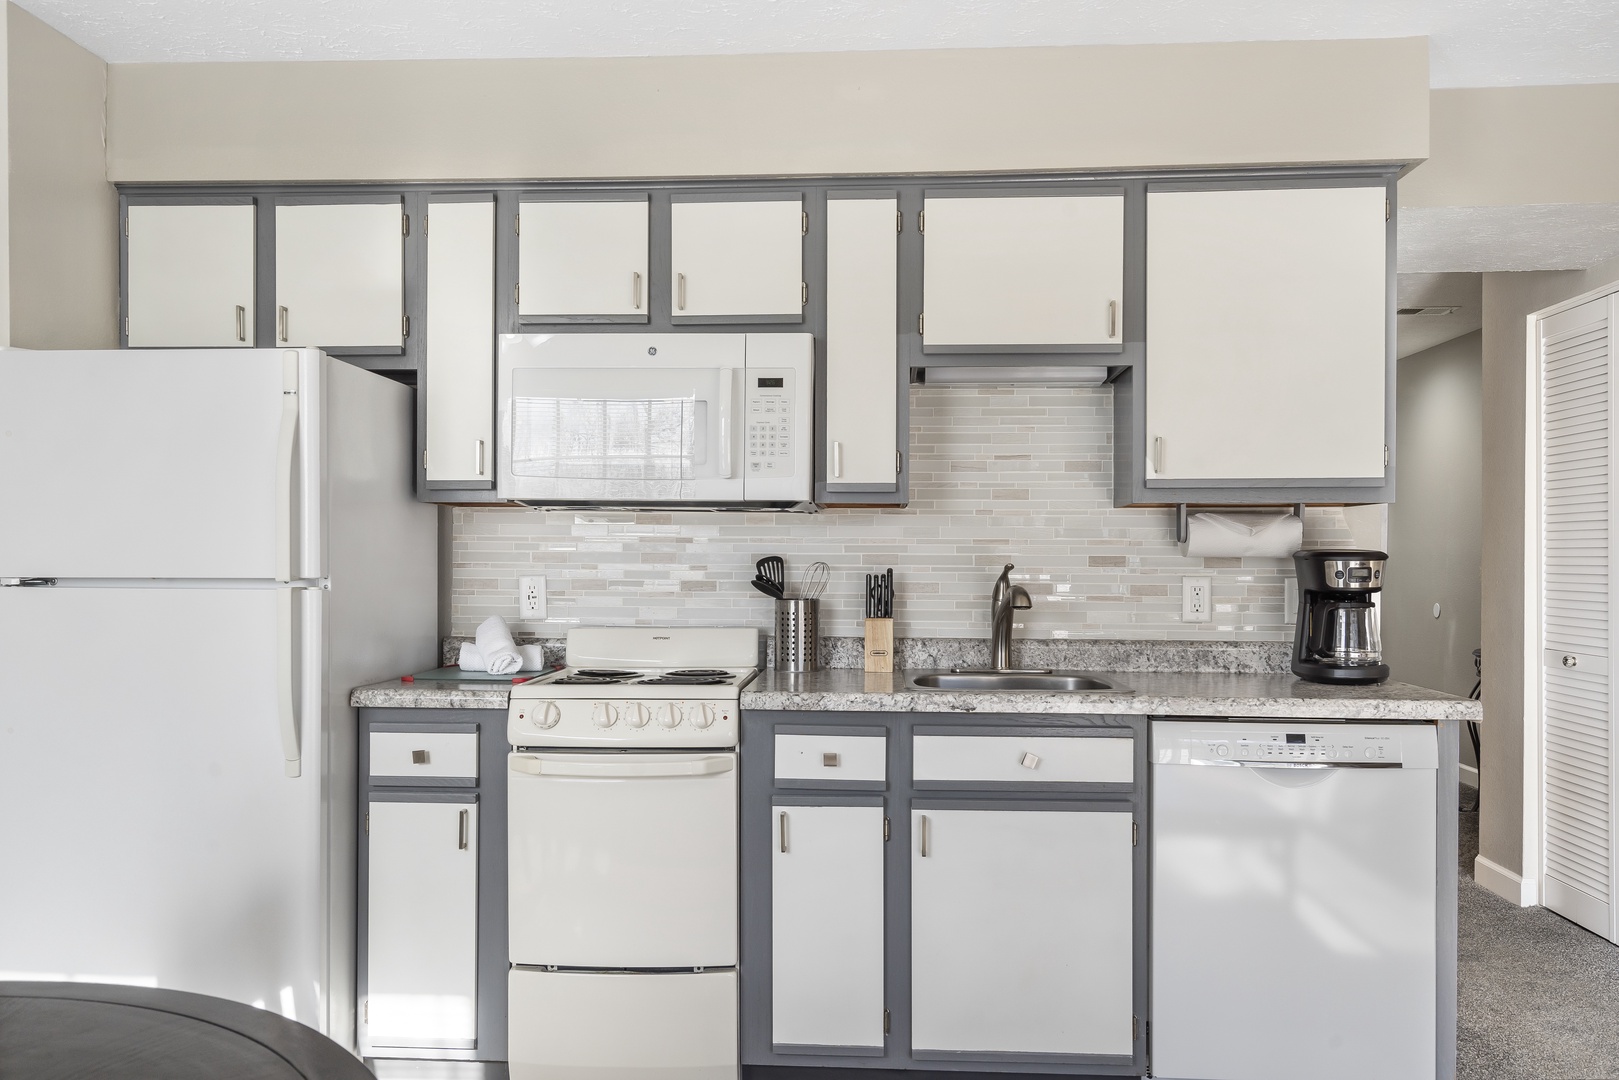 The airy kitchen area offers ample storage space & all the comforts of home